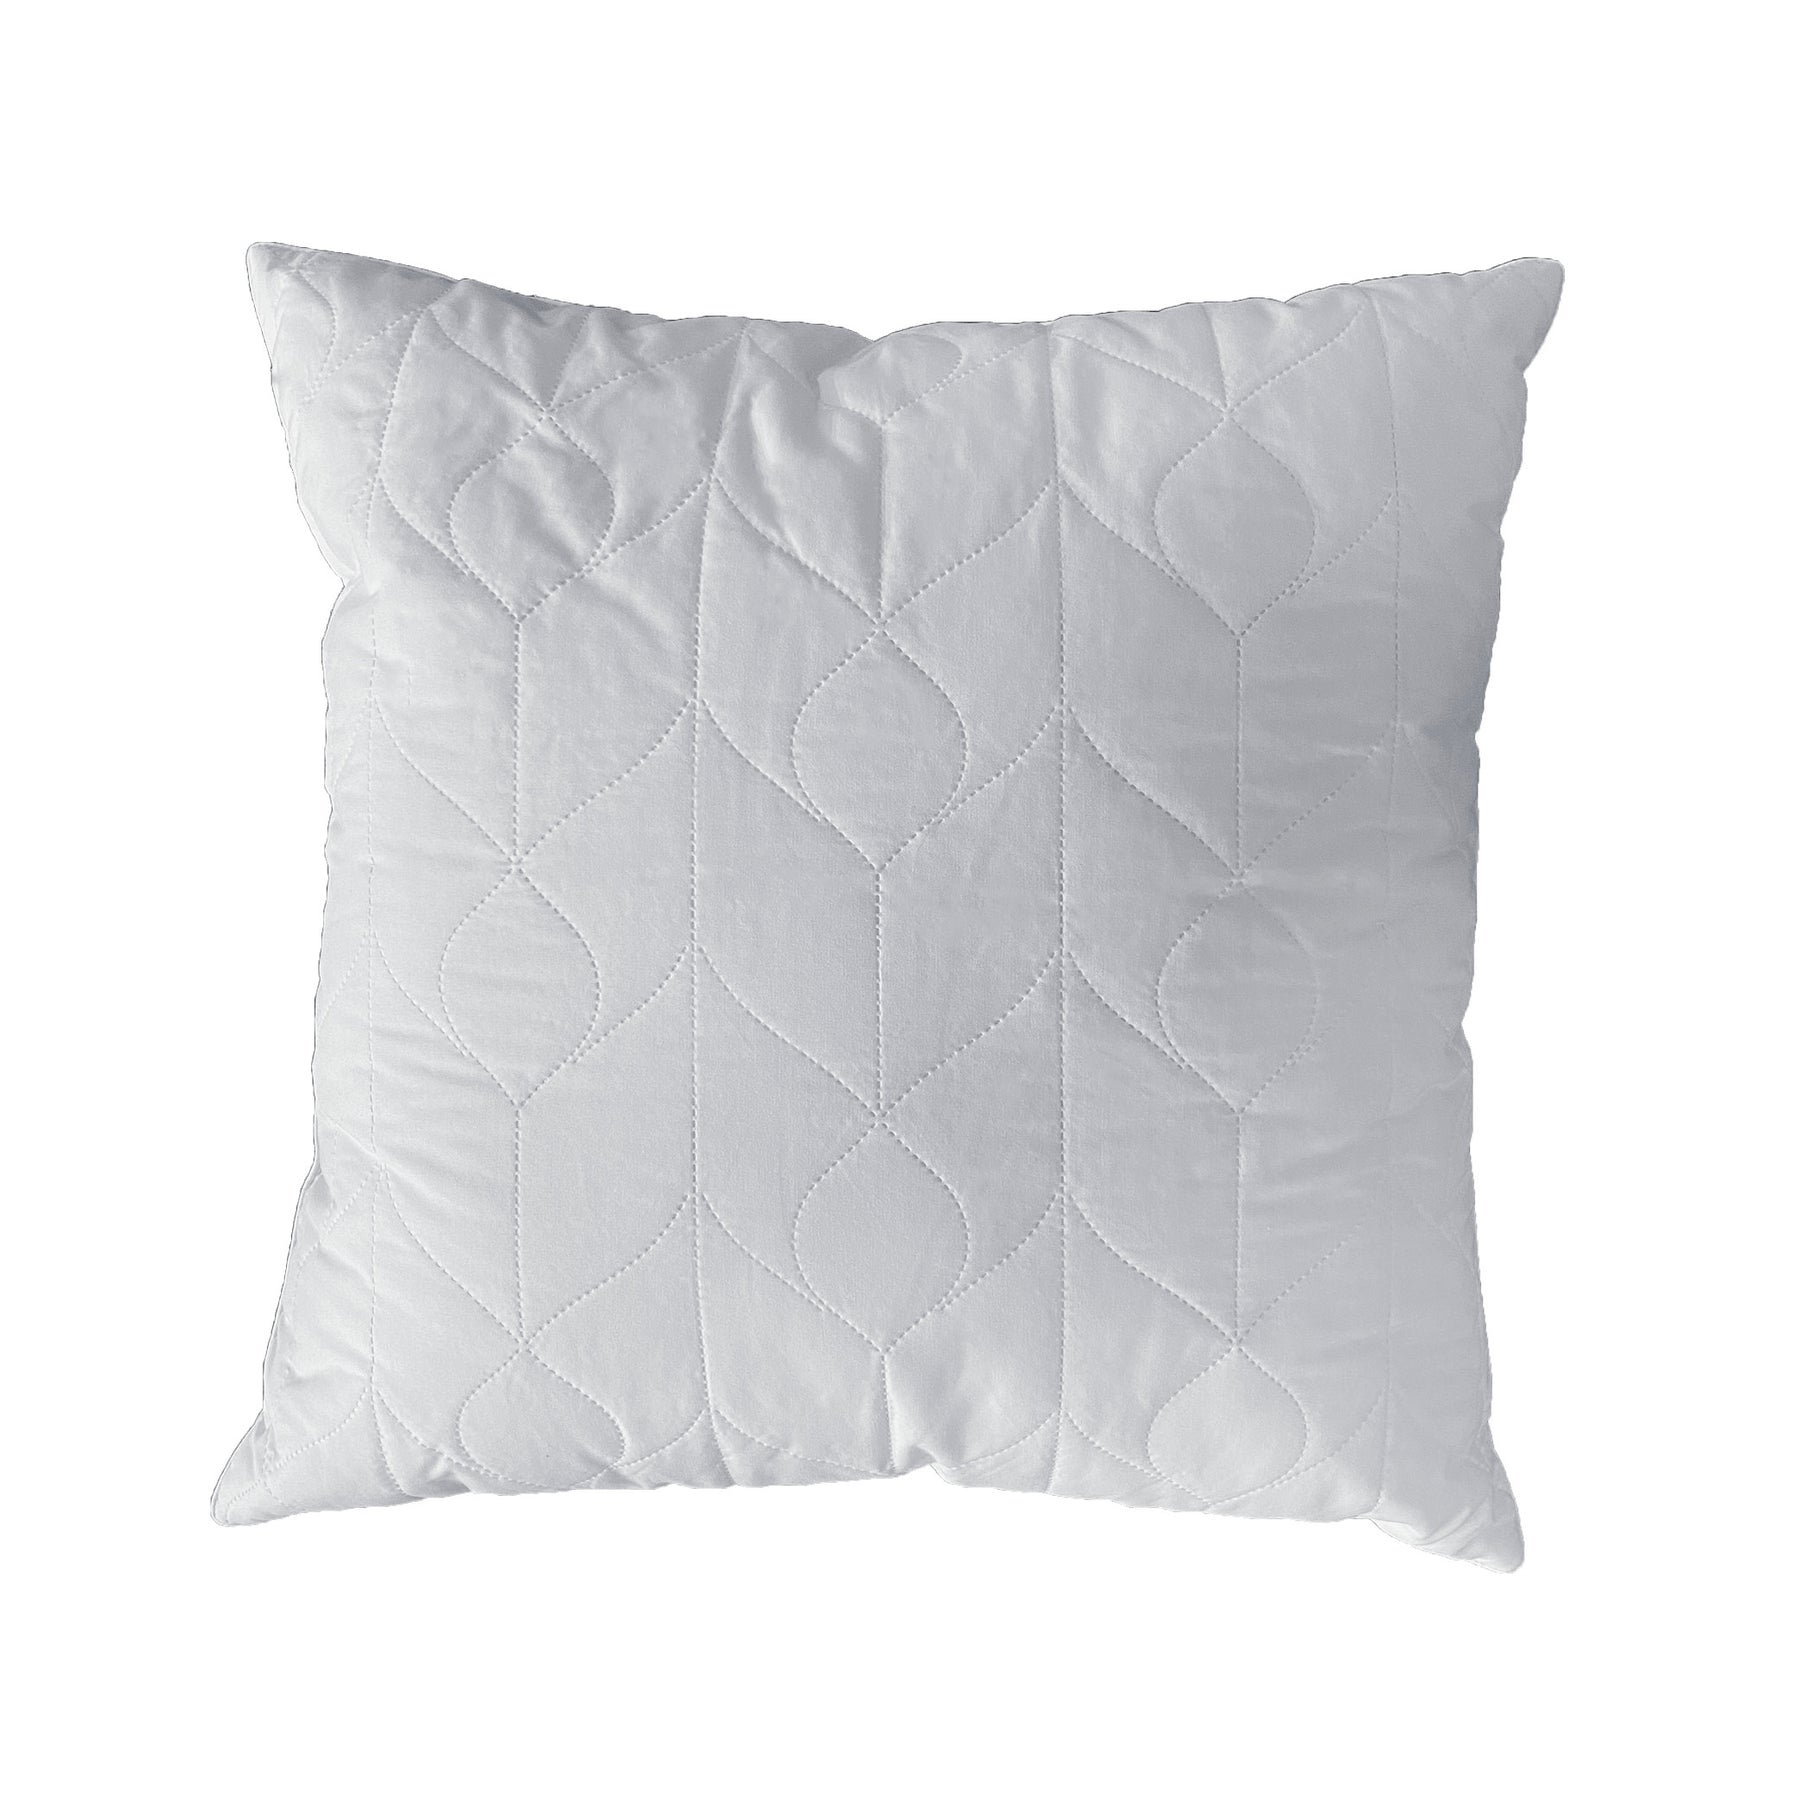 Image of a single Euro-shaped Quilted Pillow Insert on a white background